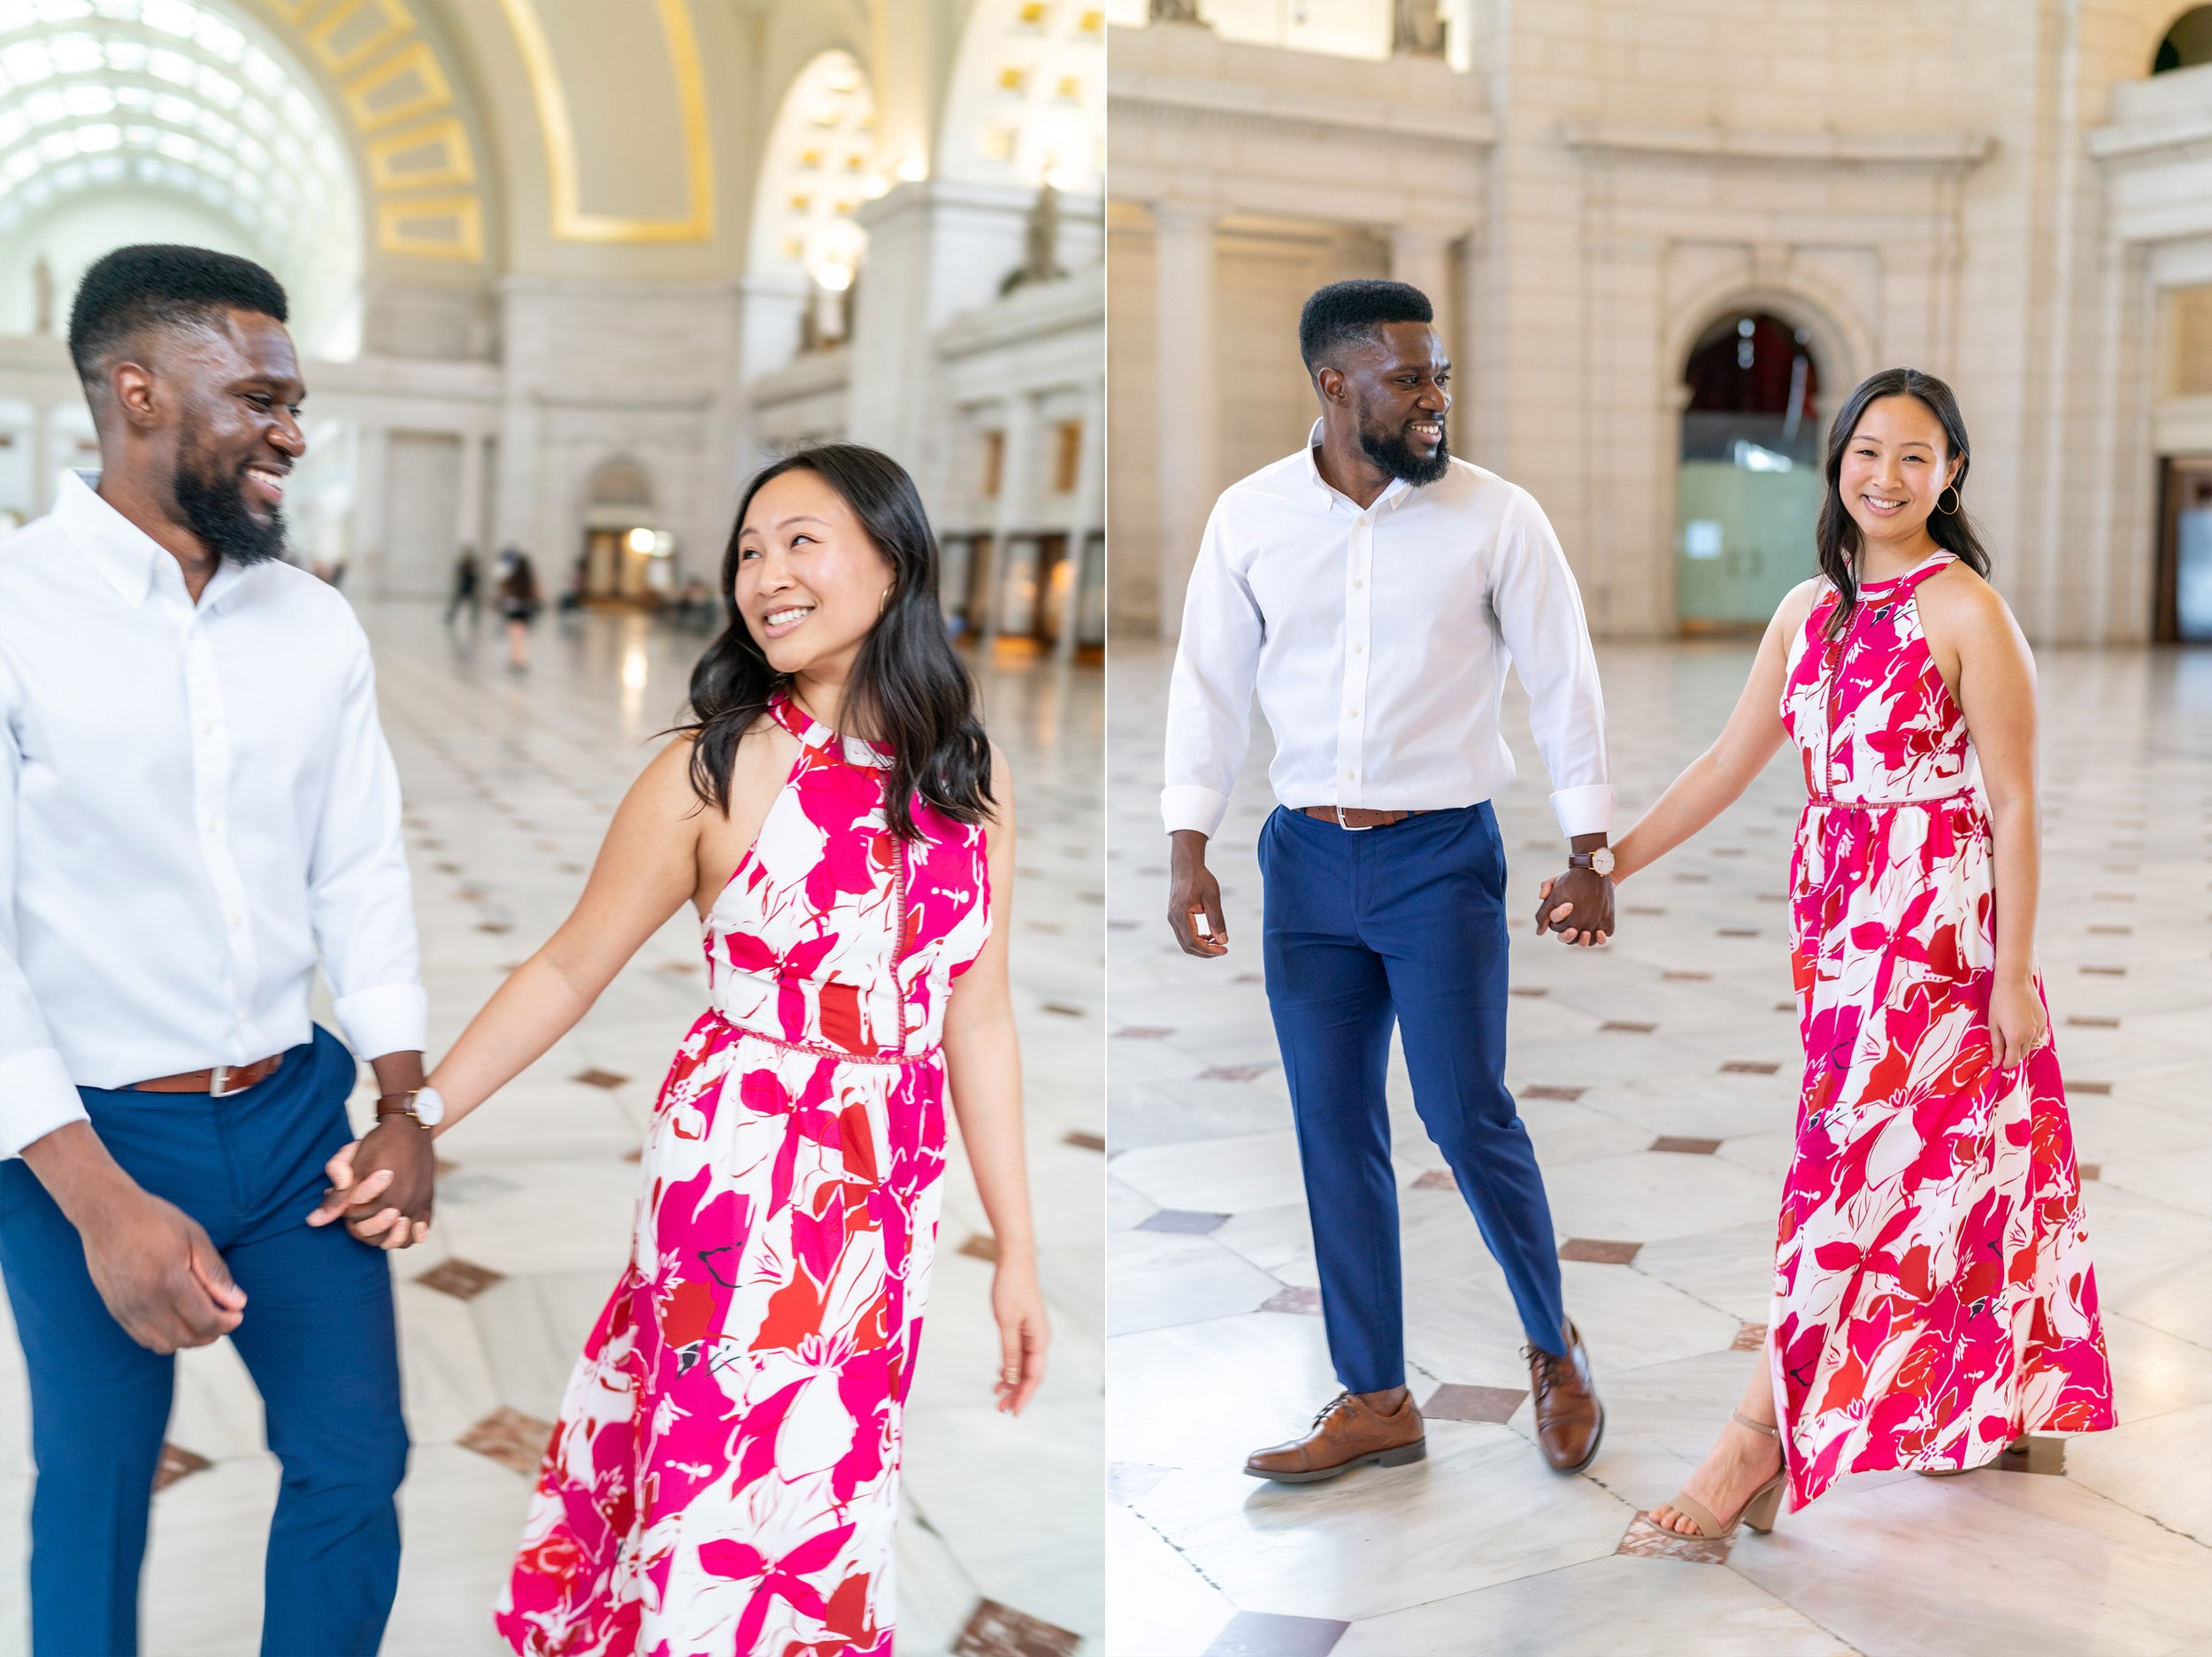 Couple walking together at engagement session at Union Station in DC